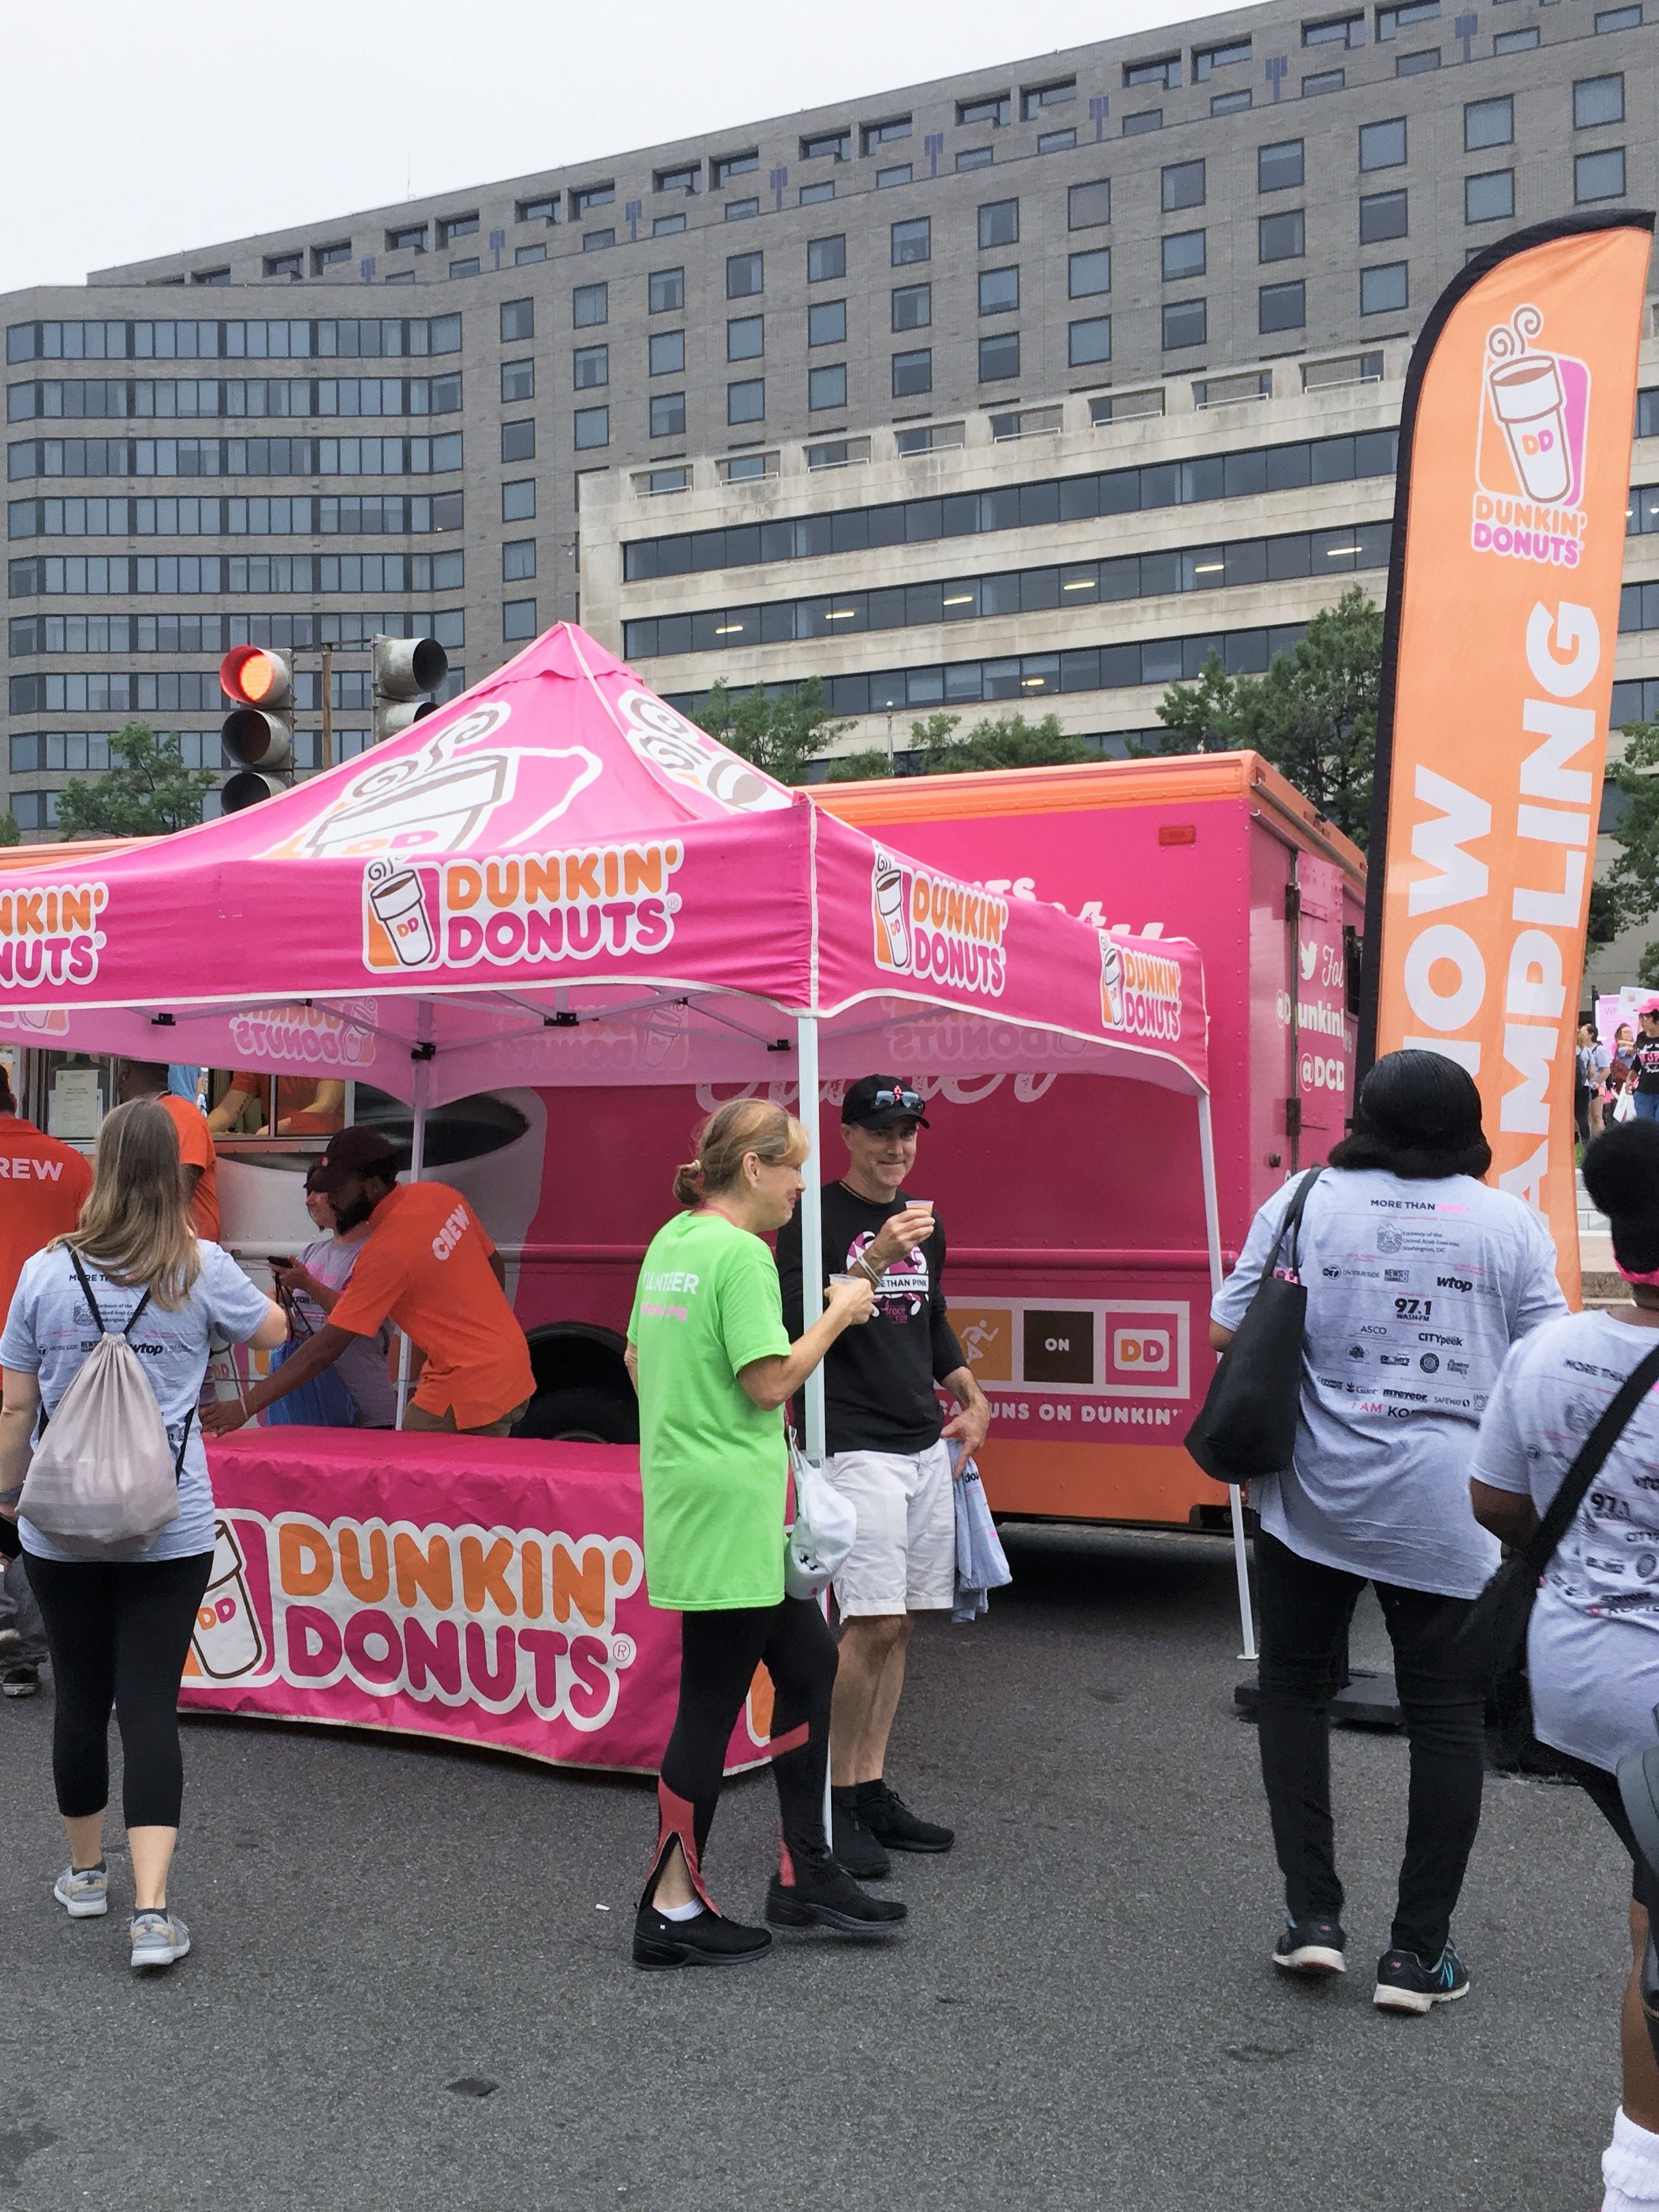 Race for a cure with Dunkin Donuts